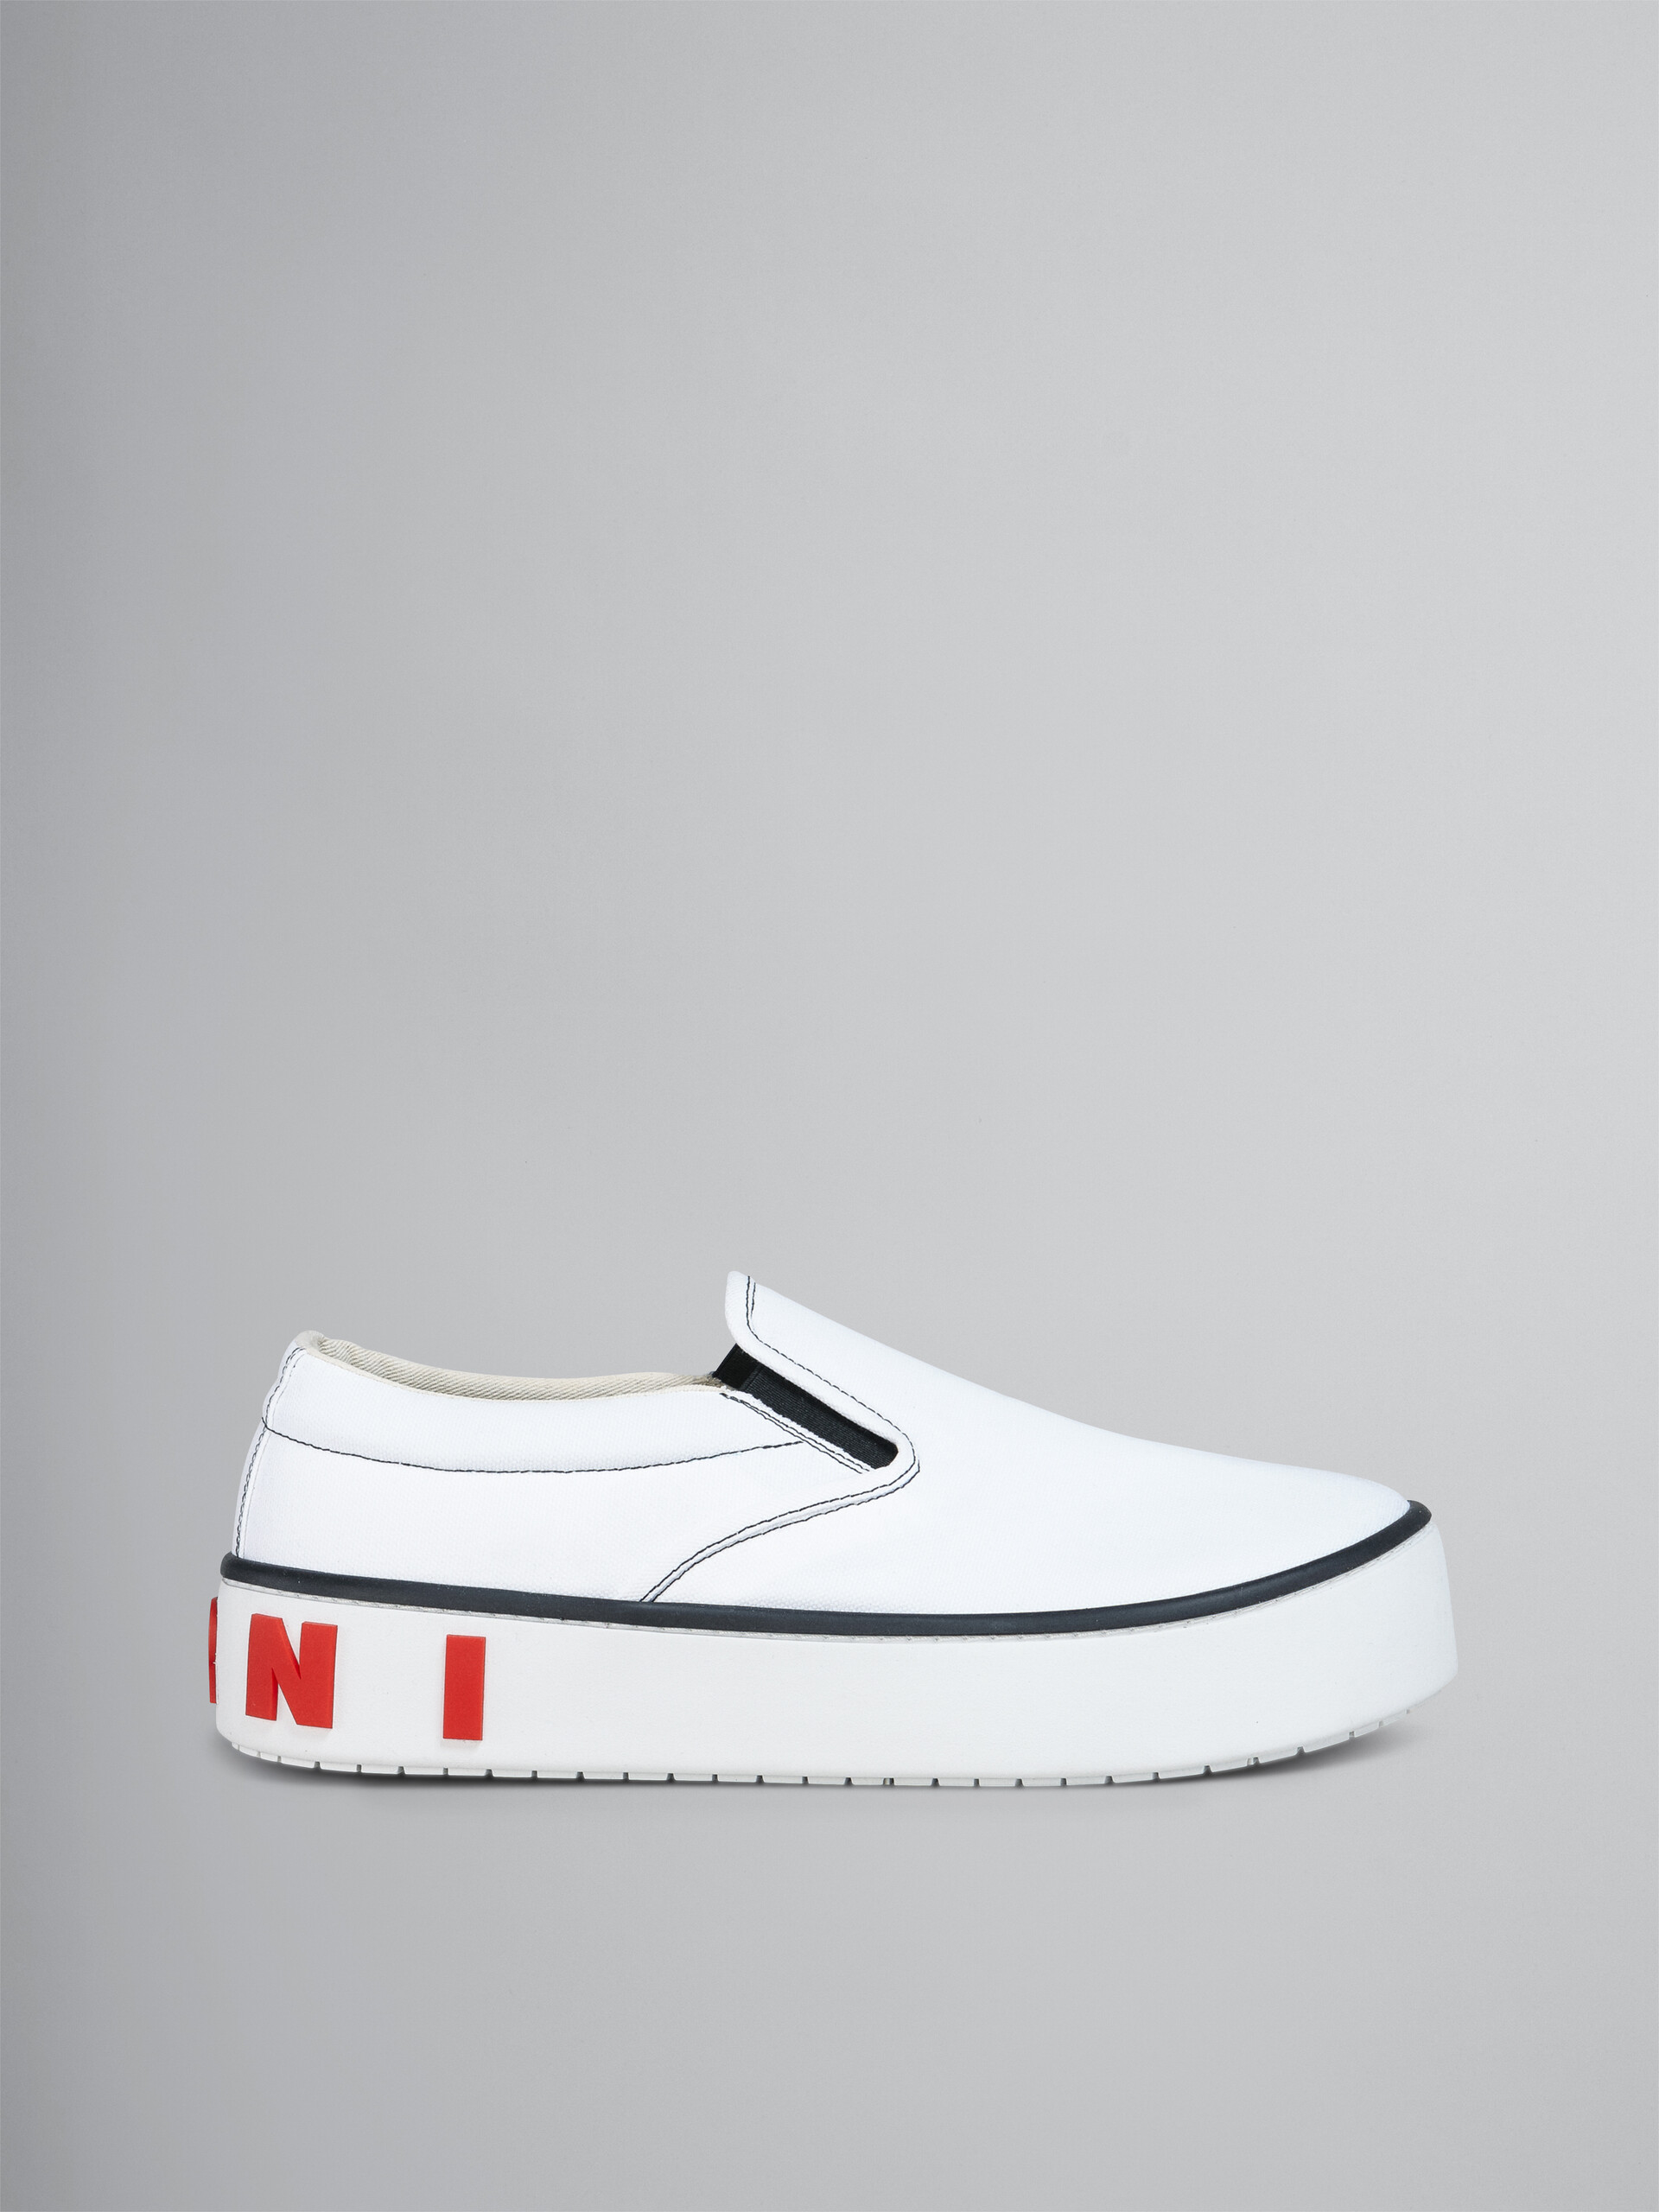 Canvas slip-on PAW sneaker with back maxi logo - Sneakers - Image 1